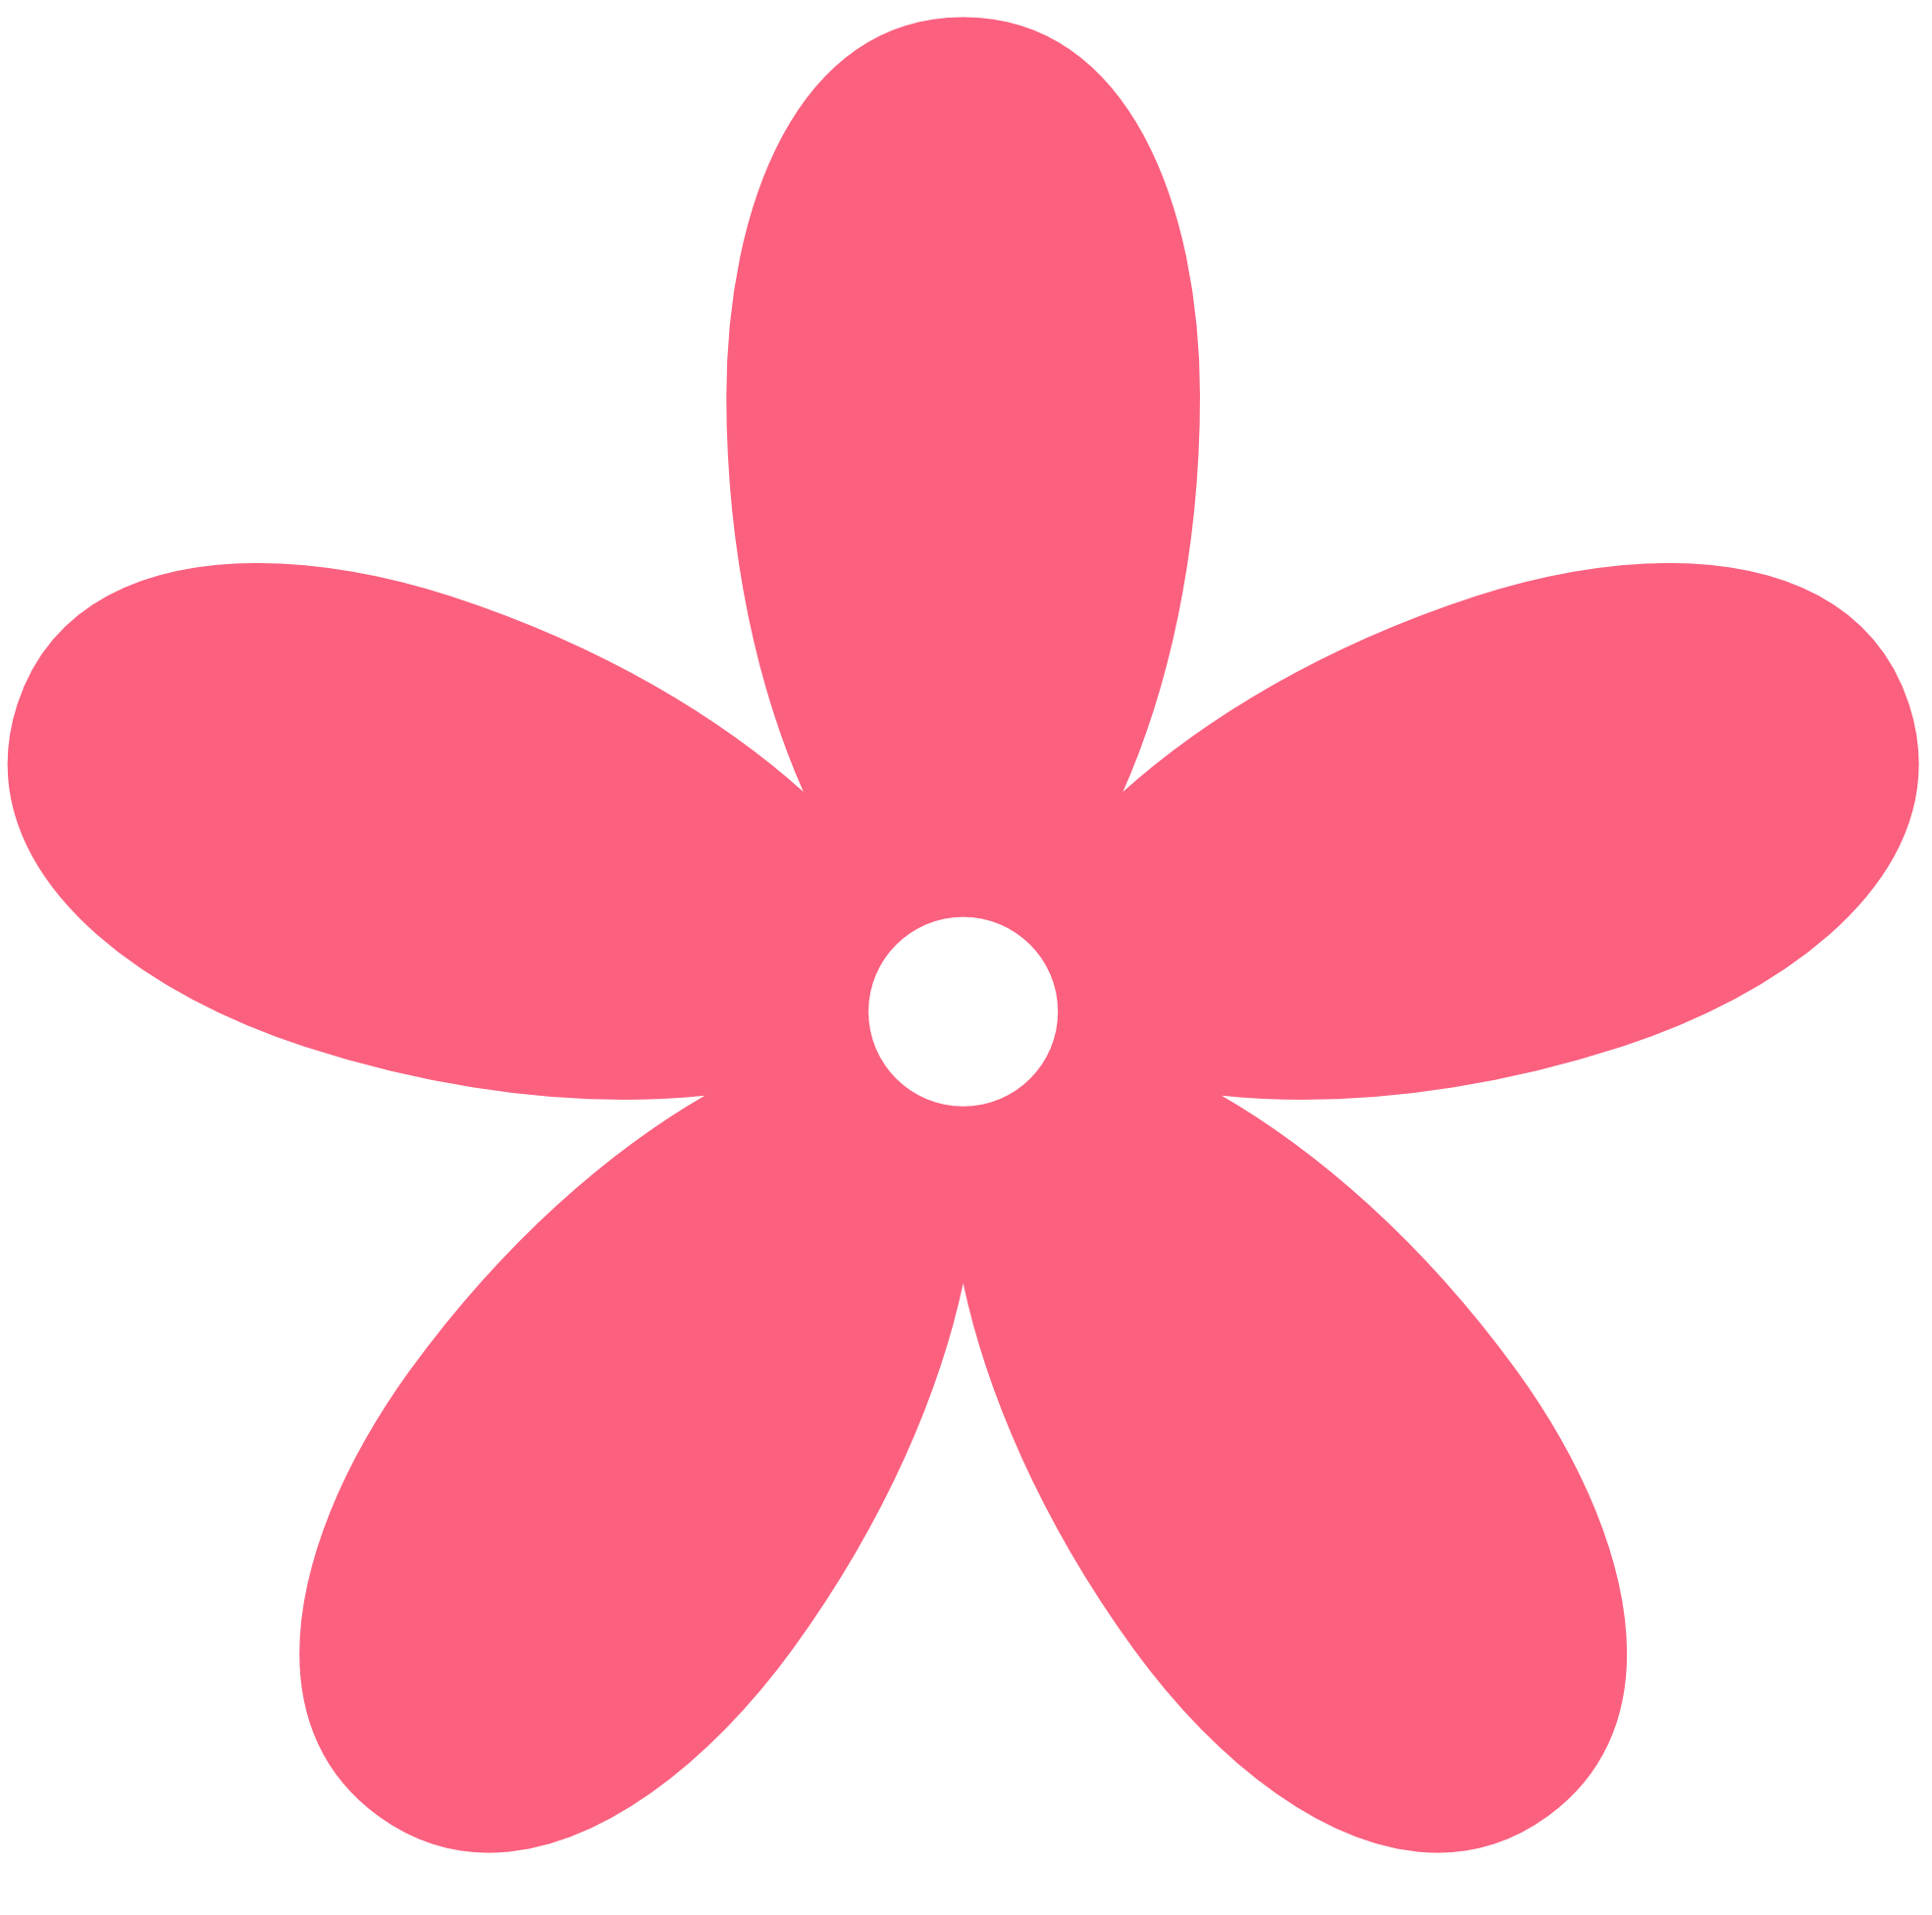 Flowers hot pink flower clipart free clipart images